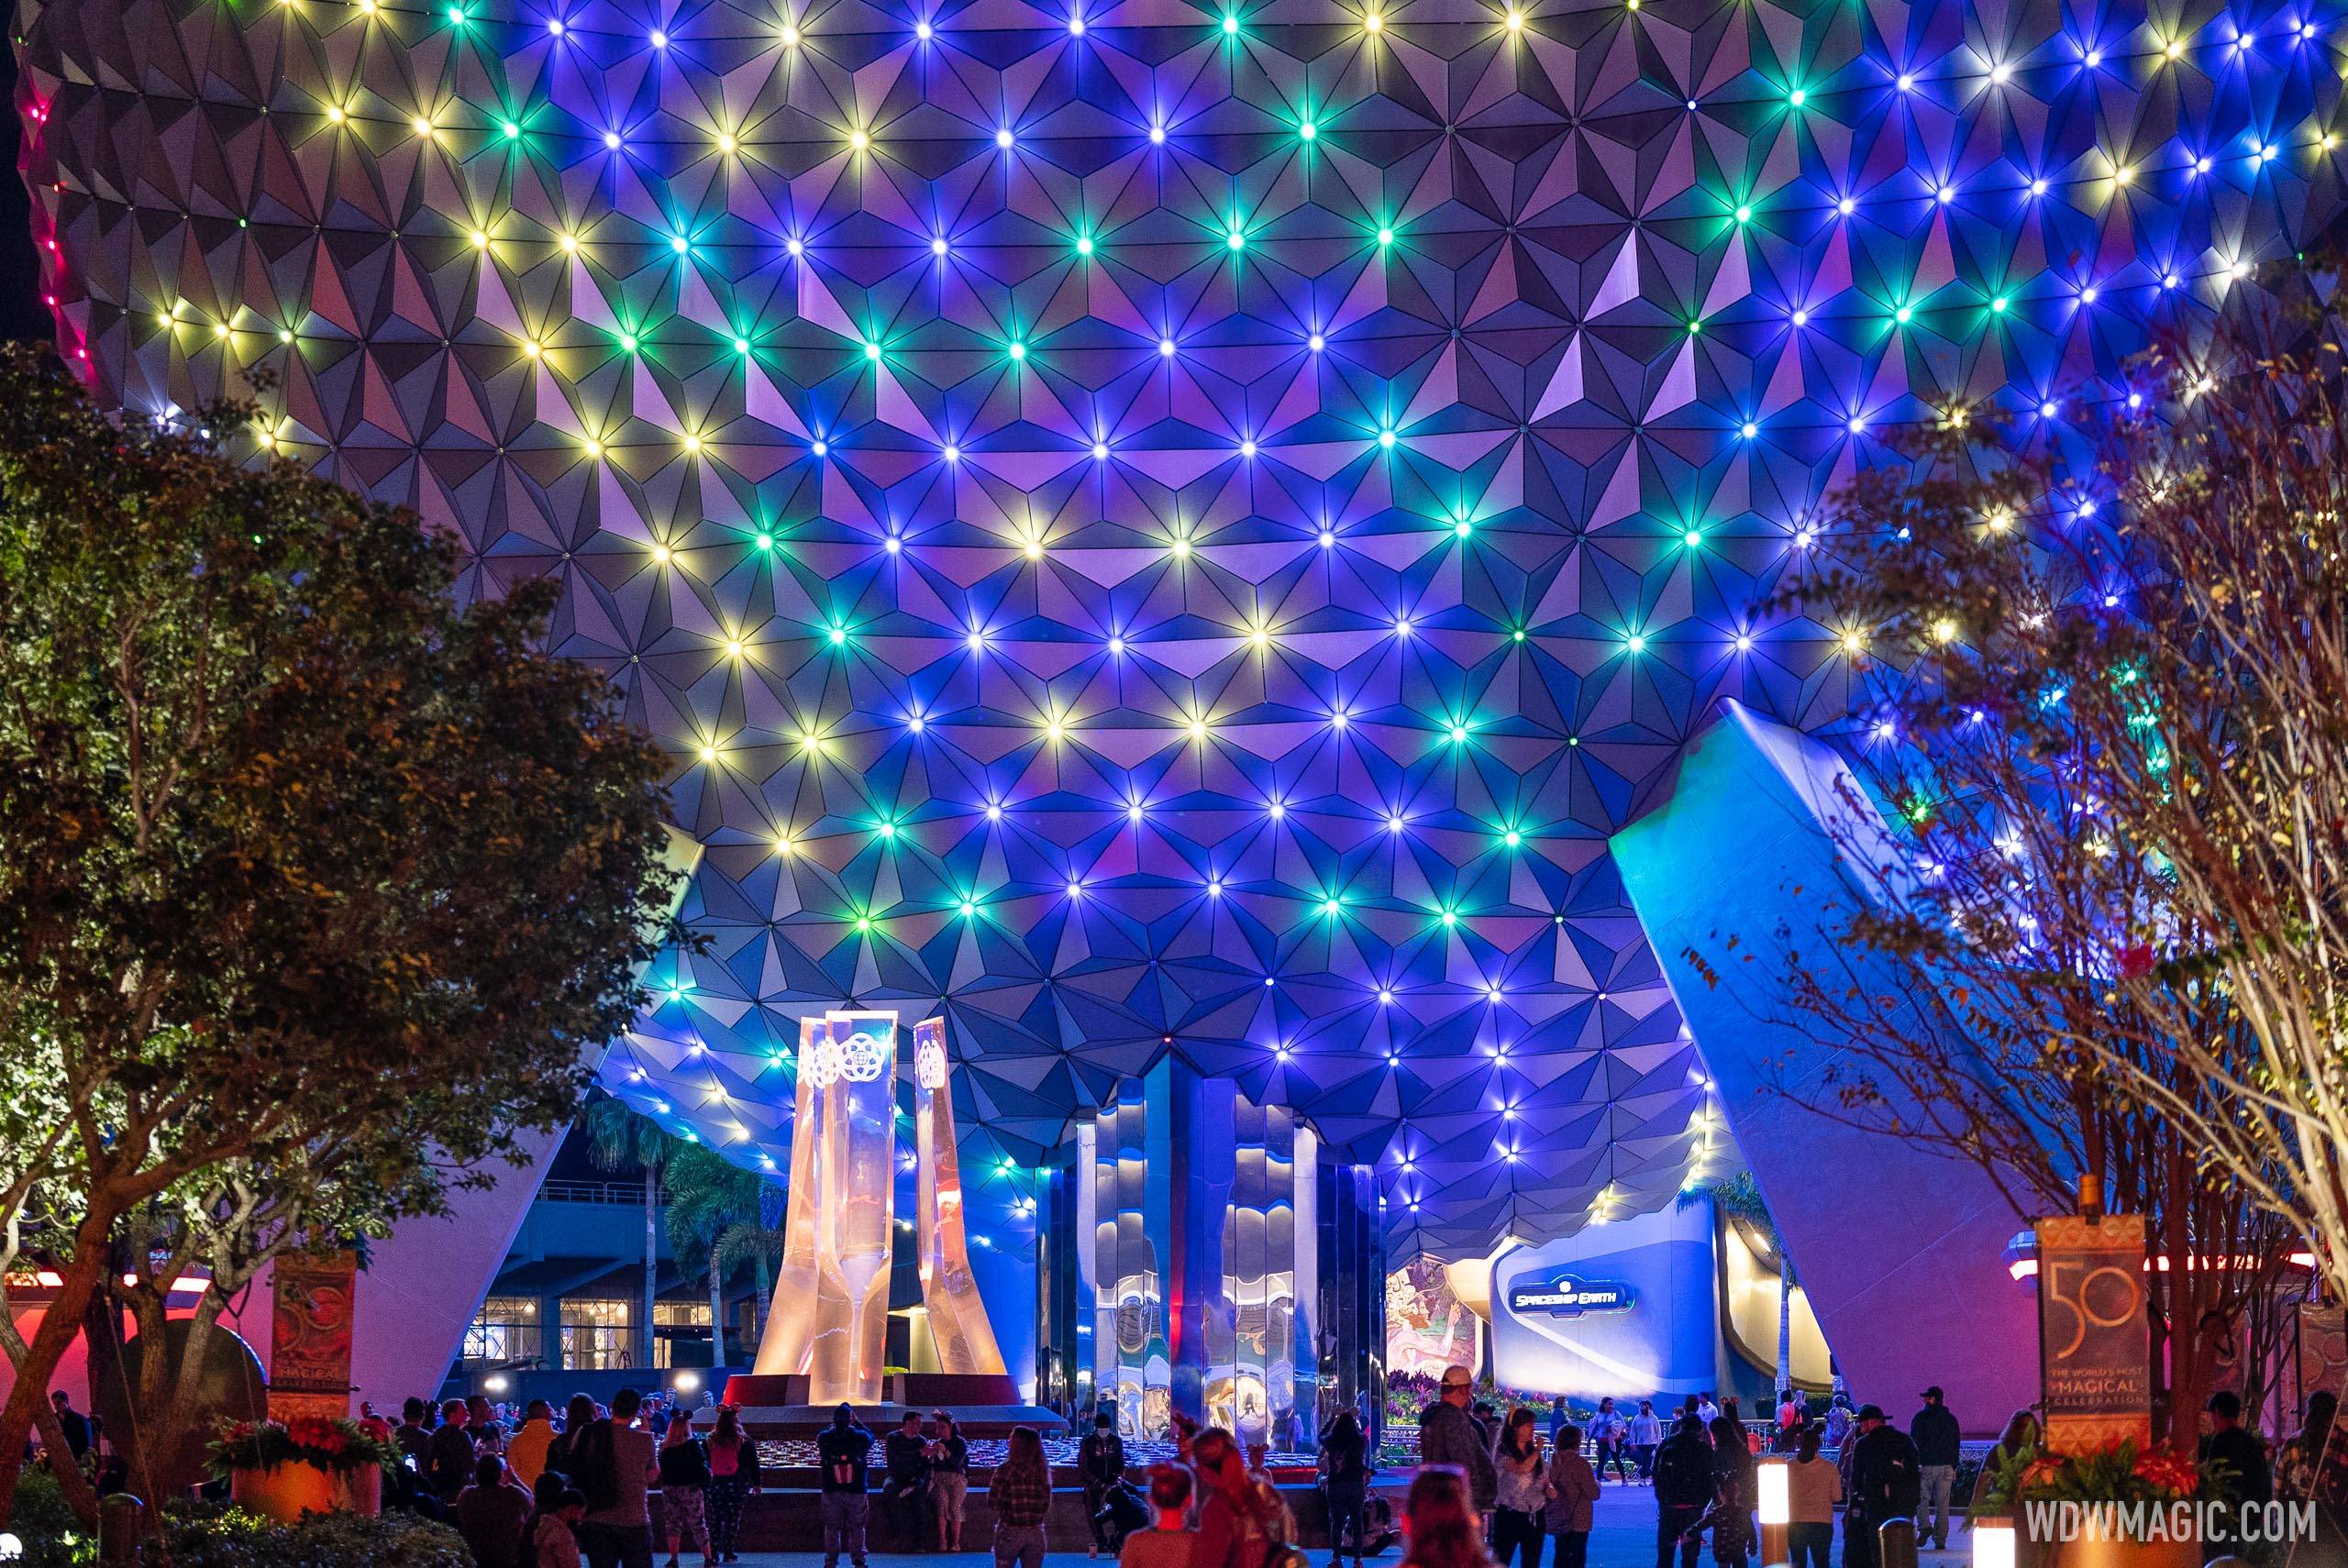 A look at Spaceship Earth's new holiday lighting show